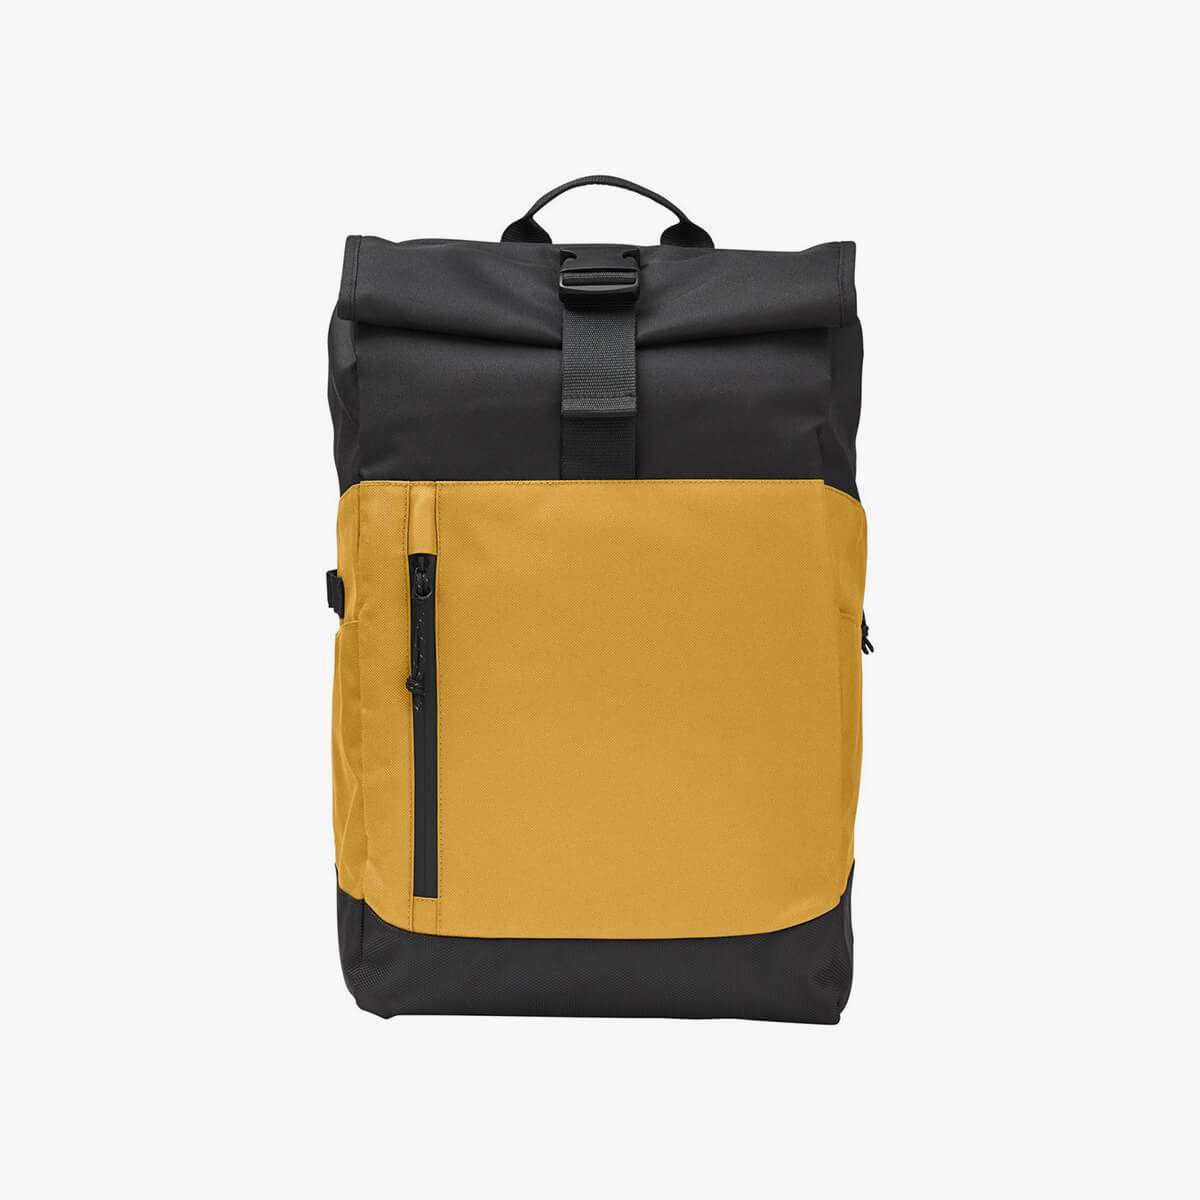 The Essentials Eco Rolltop Backpack